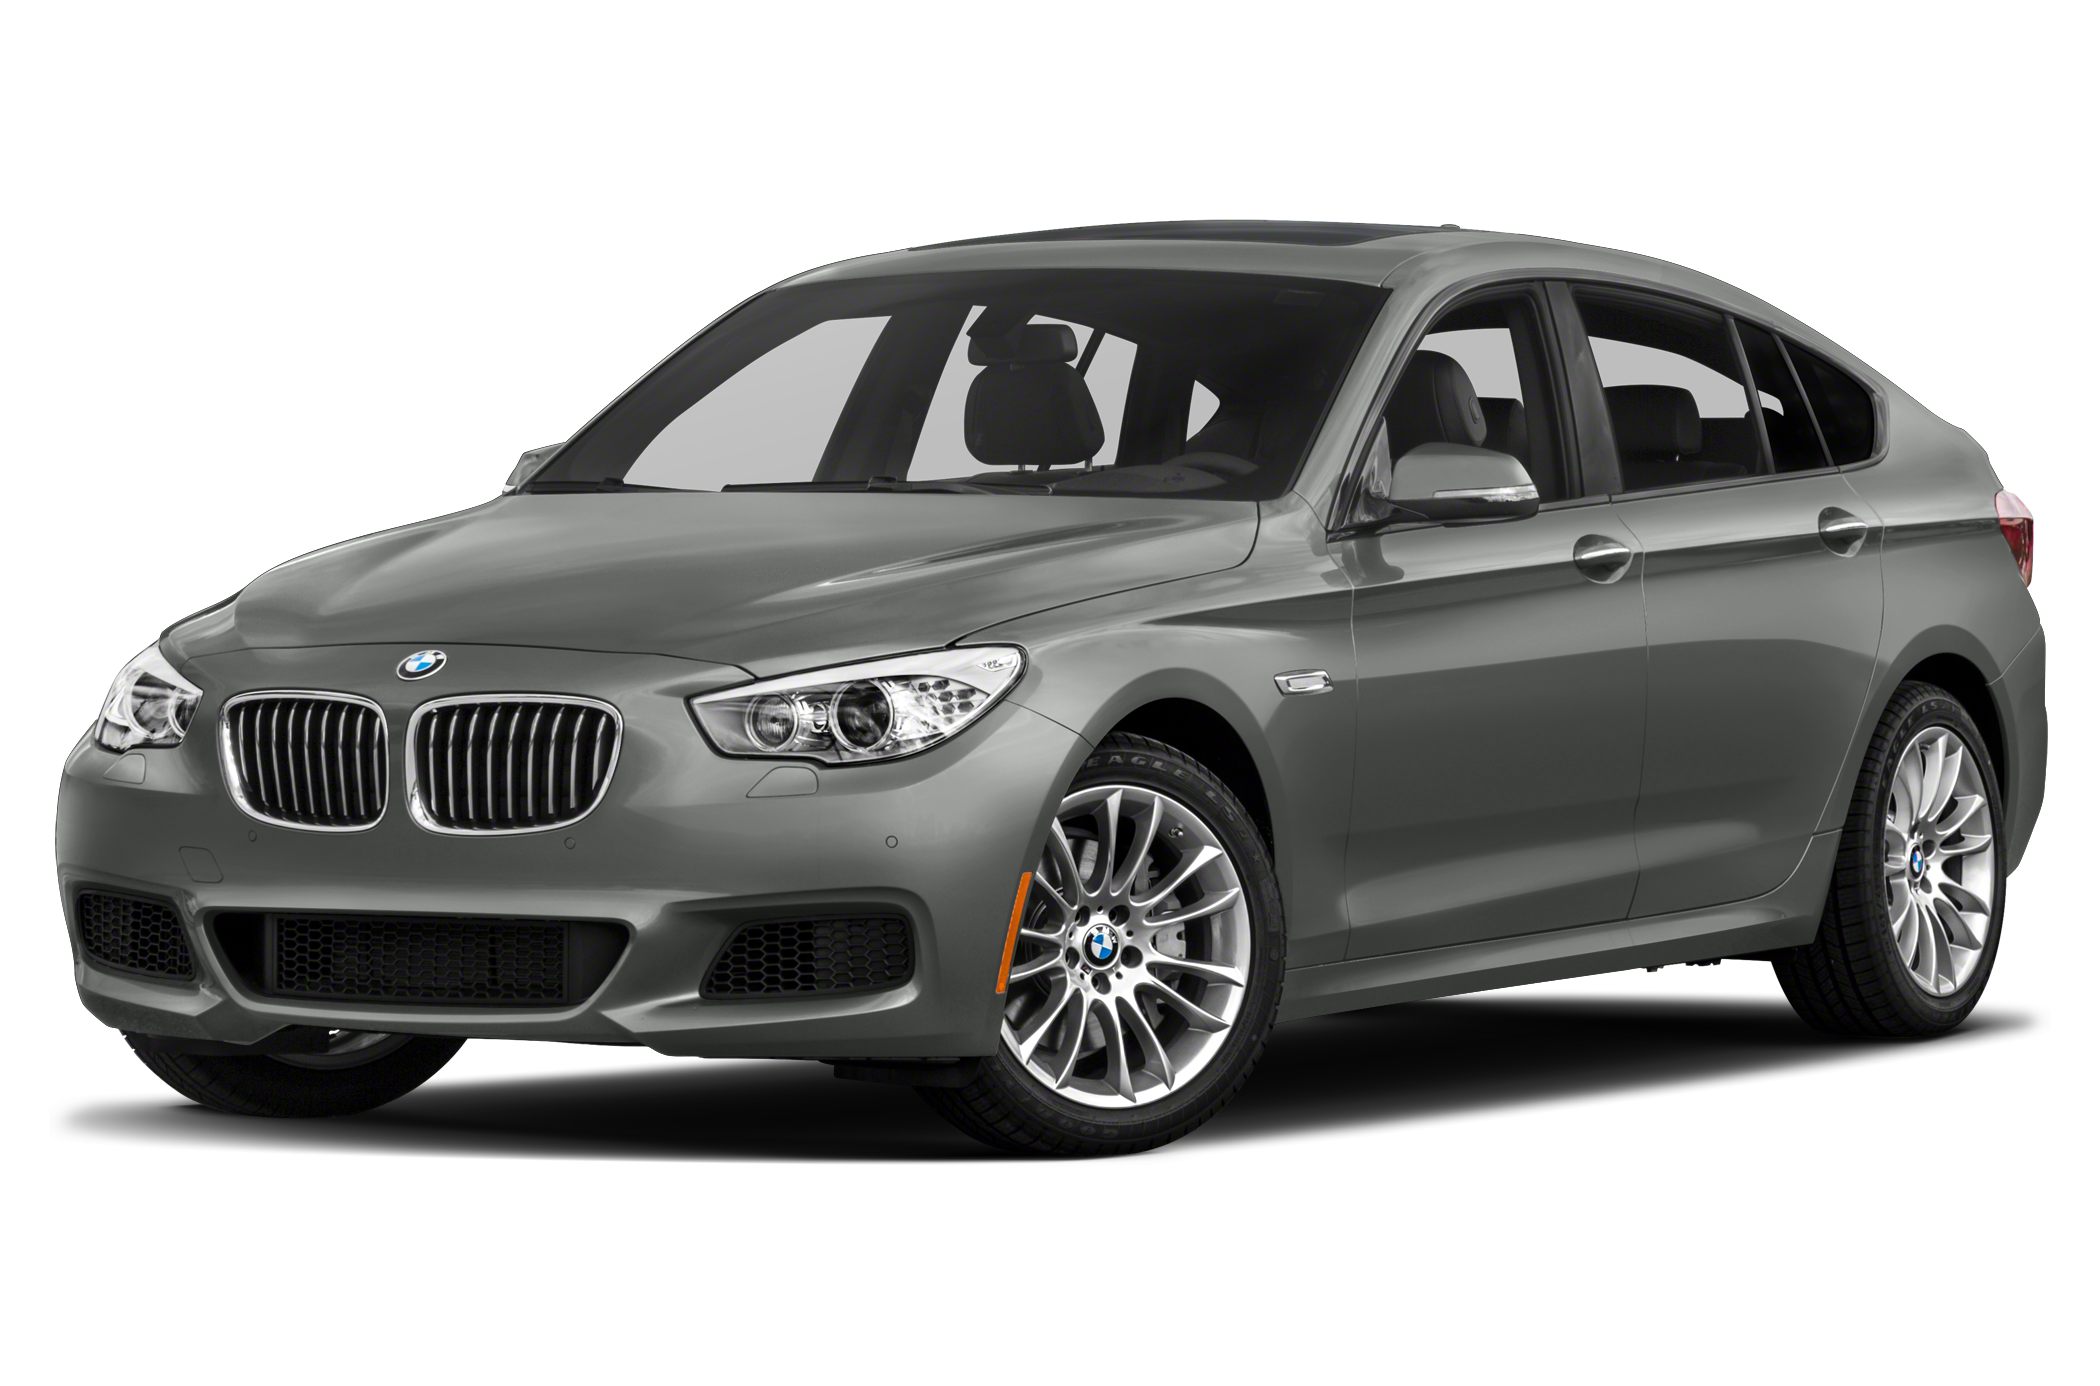  BMW 550I oem parts and accessories on sale